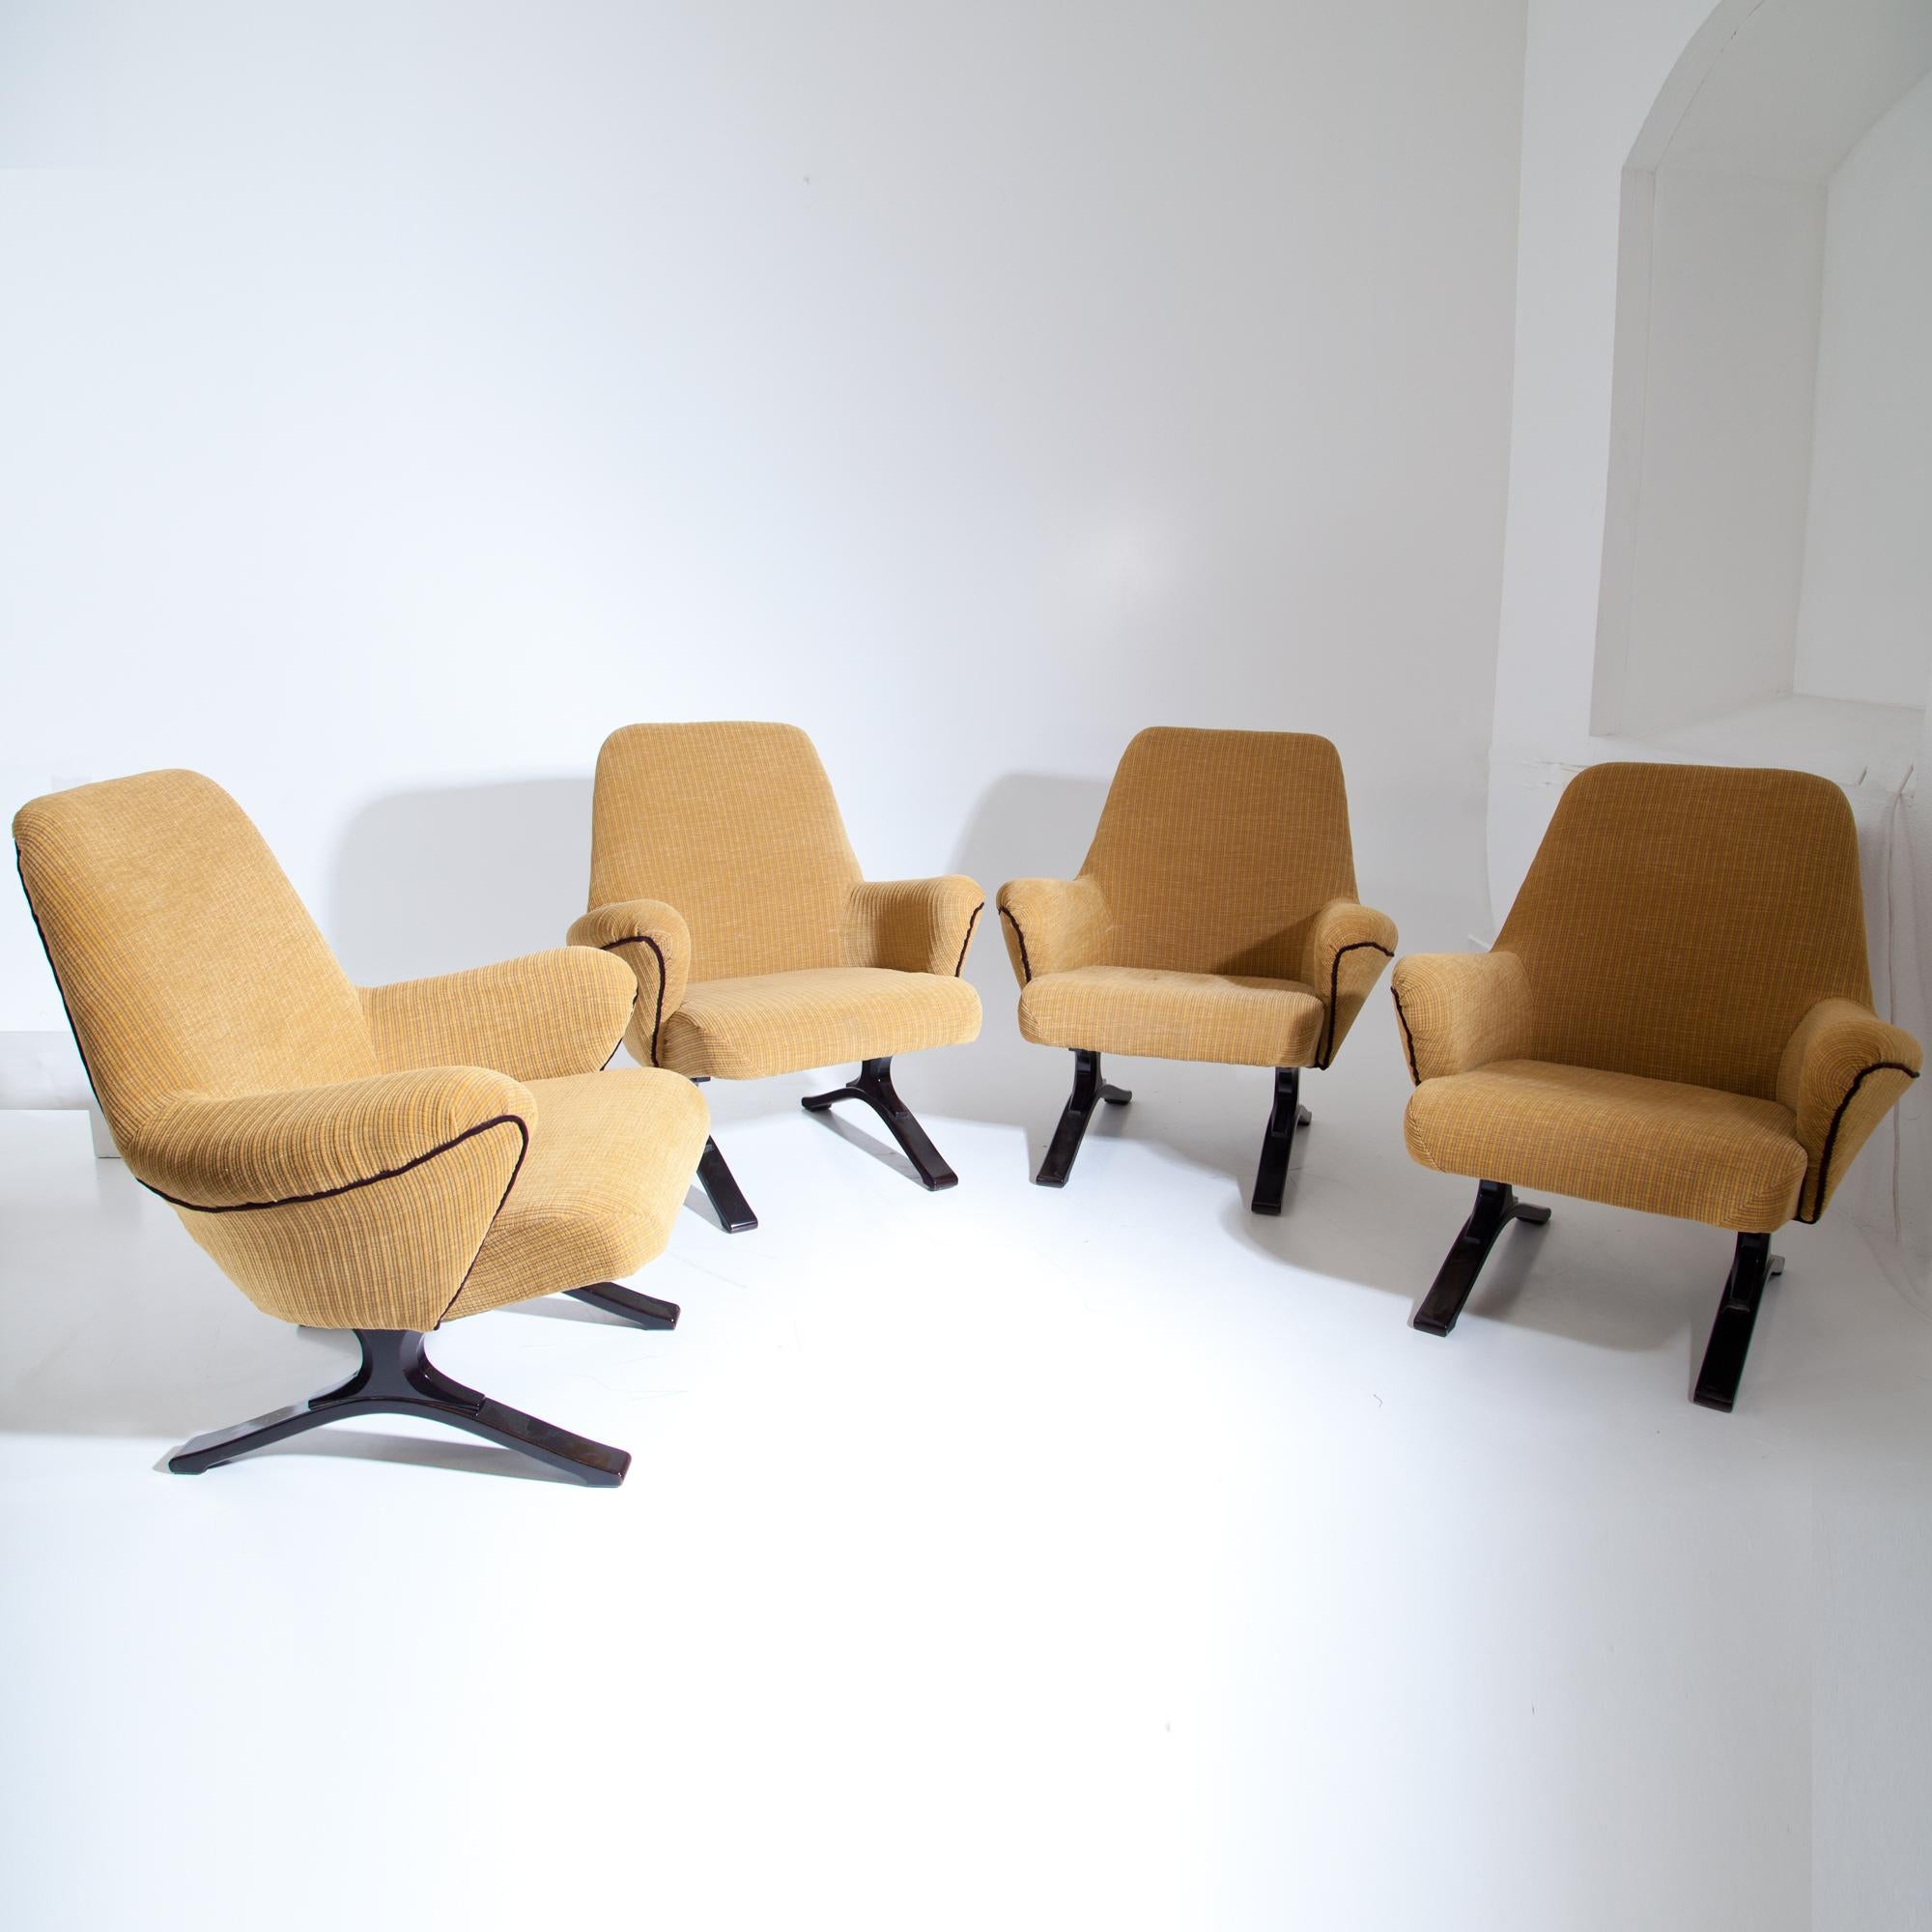 Four lounge chairs on dark stained feet with trapezoidal backrests, deep seats and armrests. The chairs are covered with a yellow textured fabric with black piping.